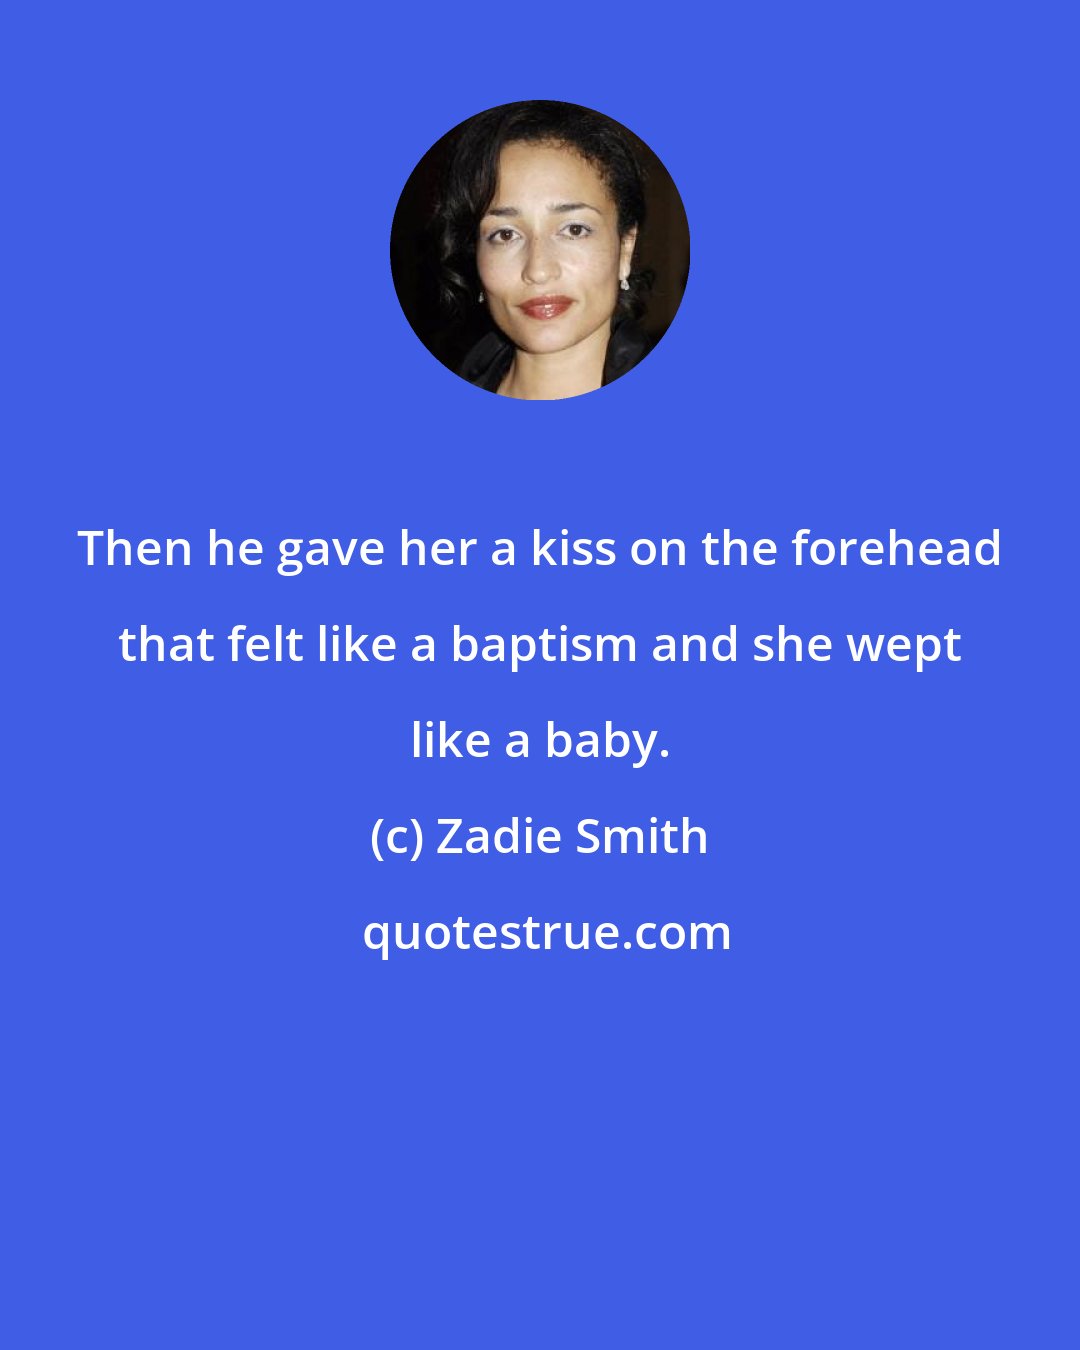 Zadie Smith: Then he gave her a kiss on the forehead that felt like a baptism and she wept like a baby.